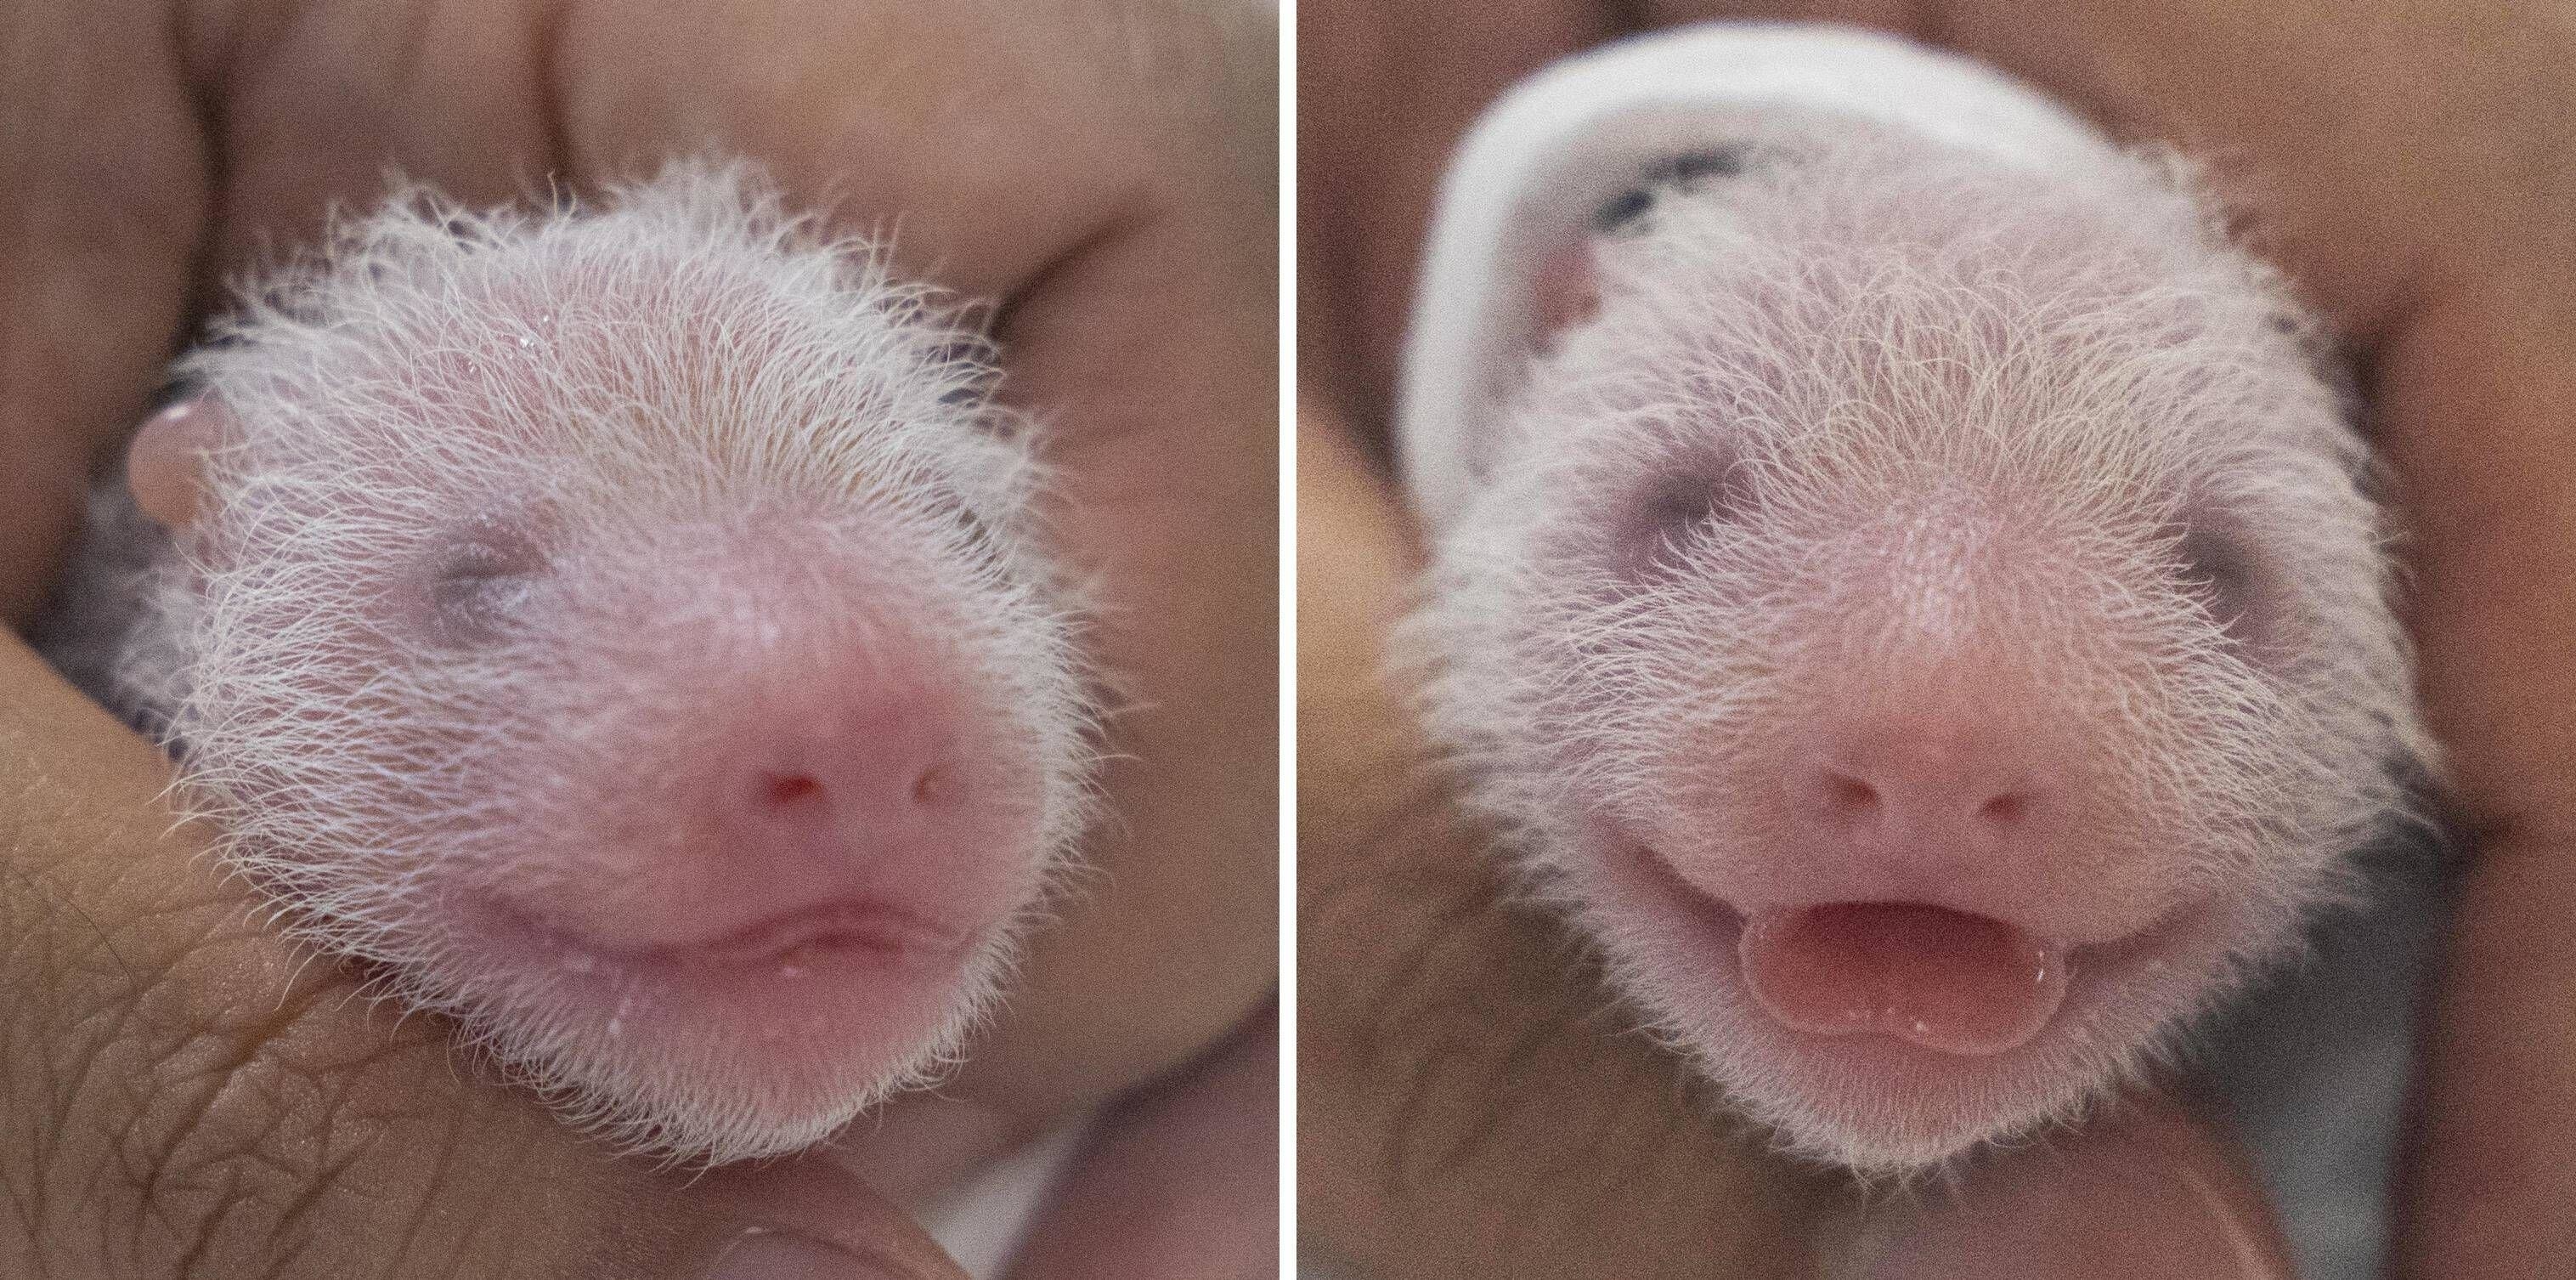 Close-up of their tiny faces, with tiny hairs visible and a little tongue